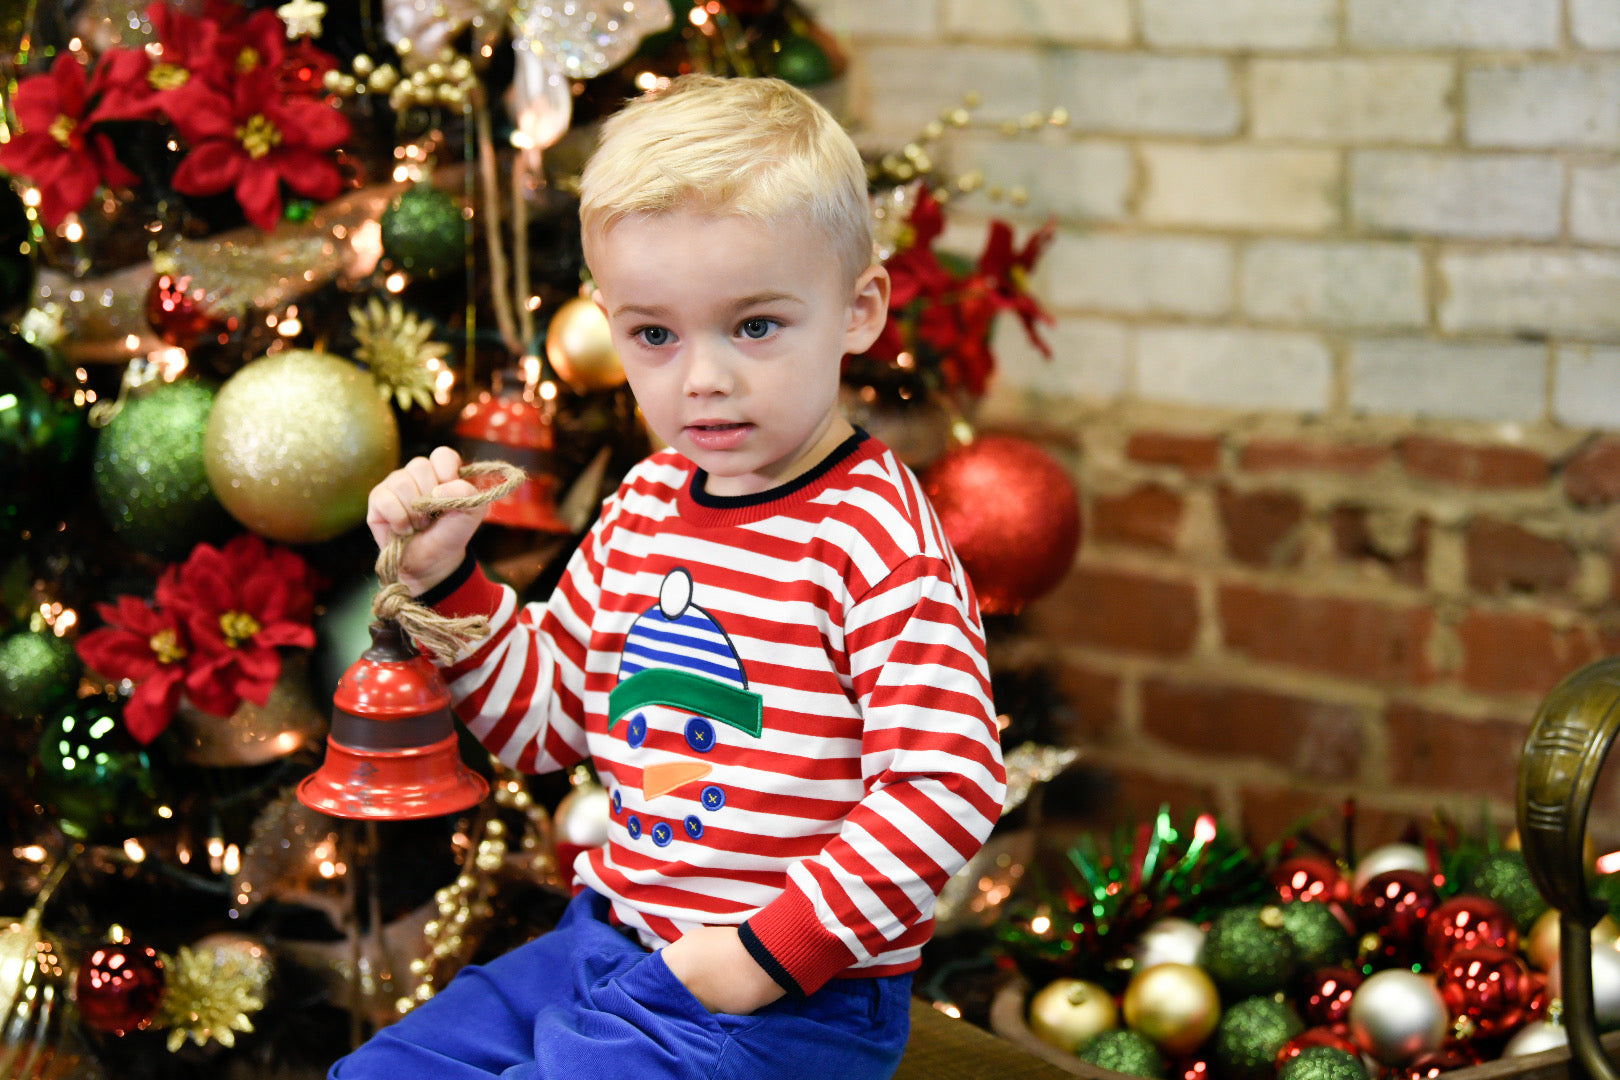 boy holding ornament wearing red and white stripe shirt with snowman